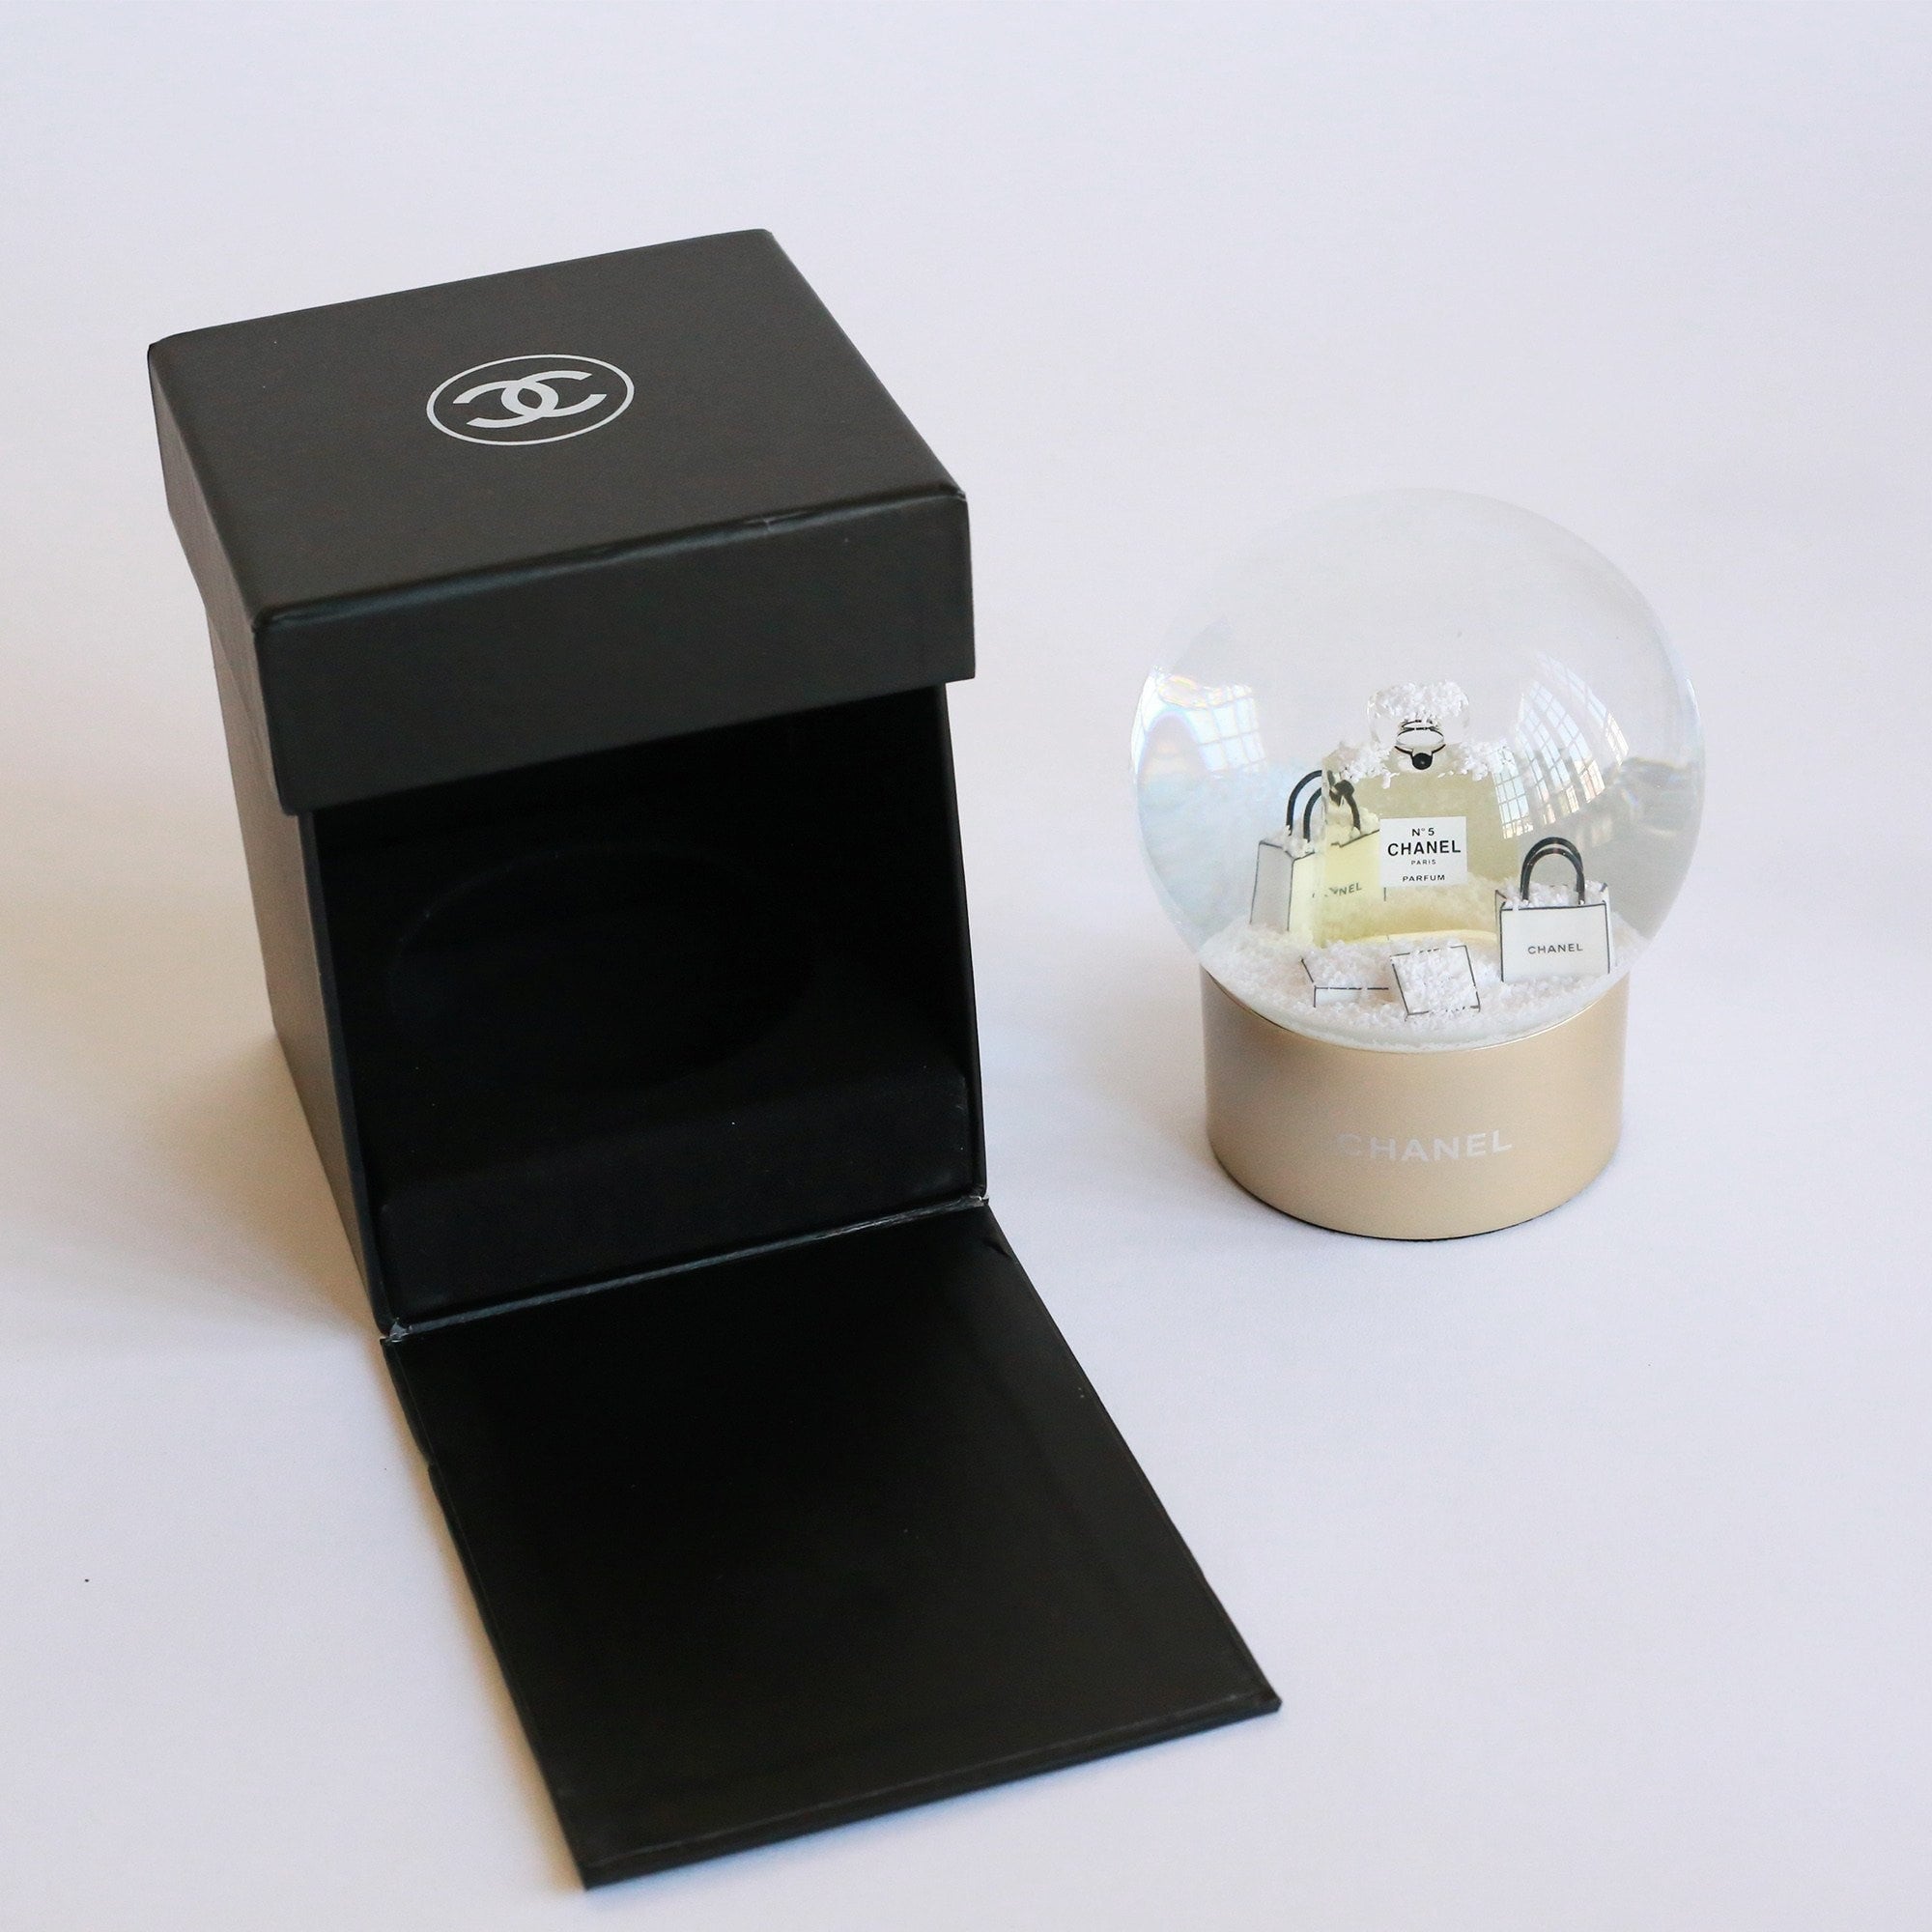 Chanel N°5 Perfume And Shopping Bag Motorized Snow Globe Available For  Immediate Sale At Sotheby's